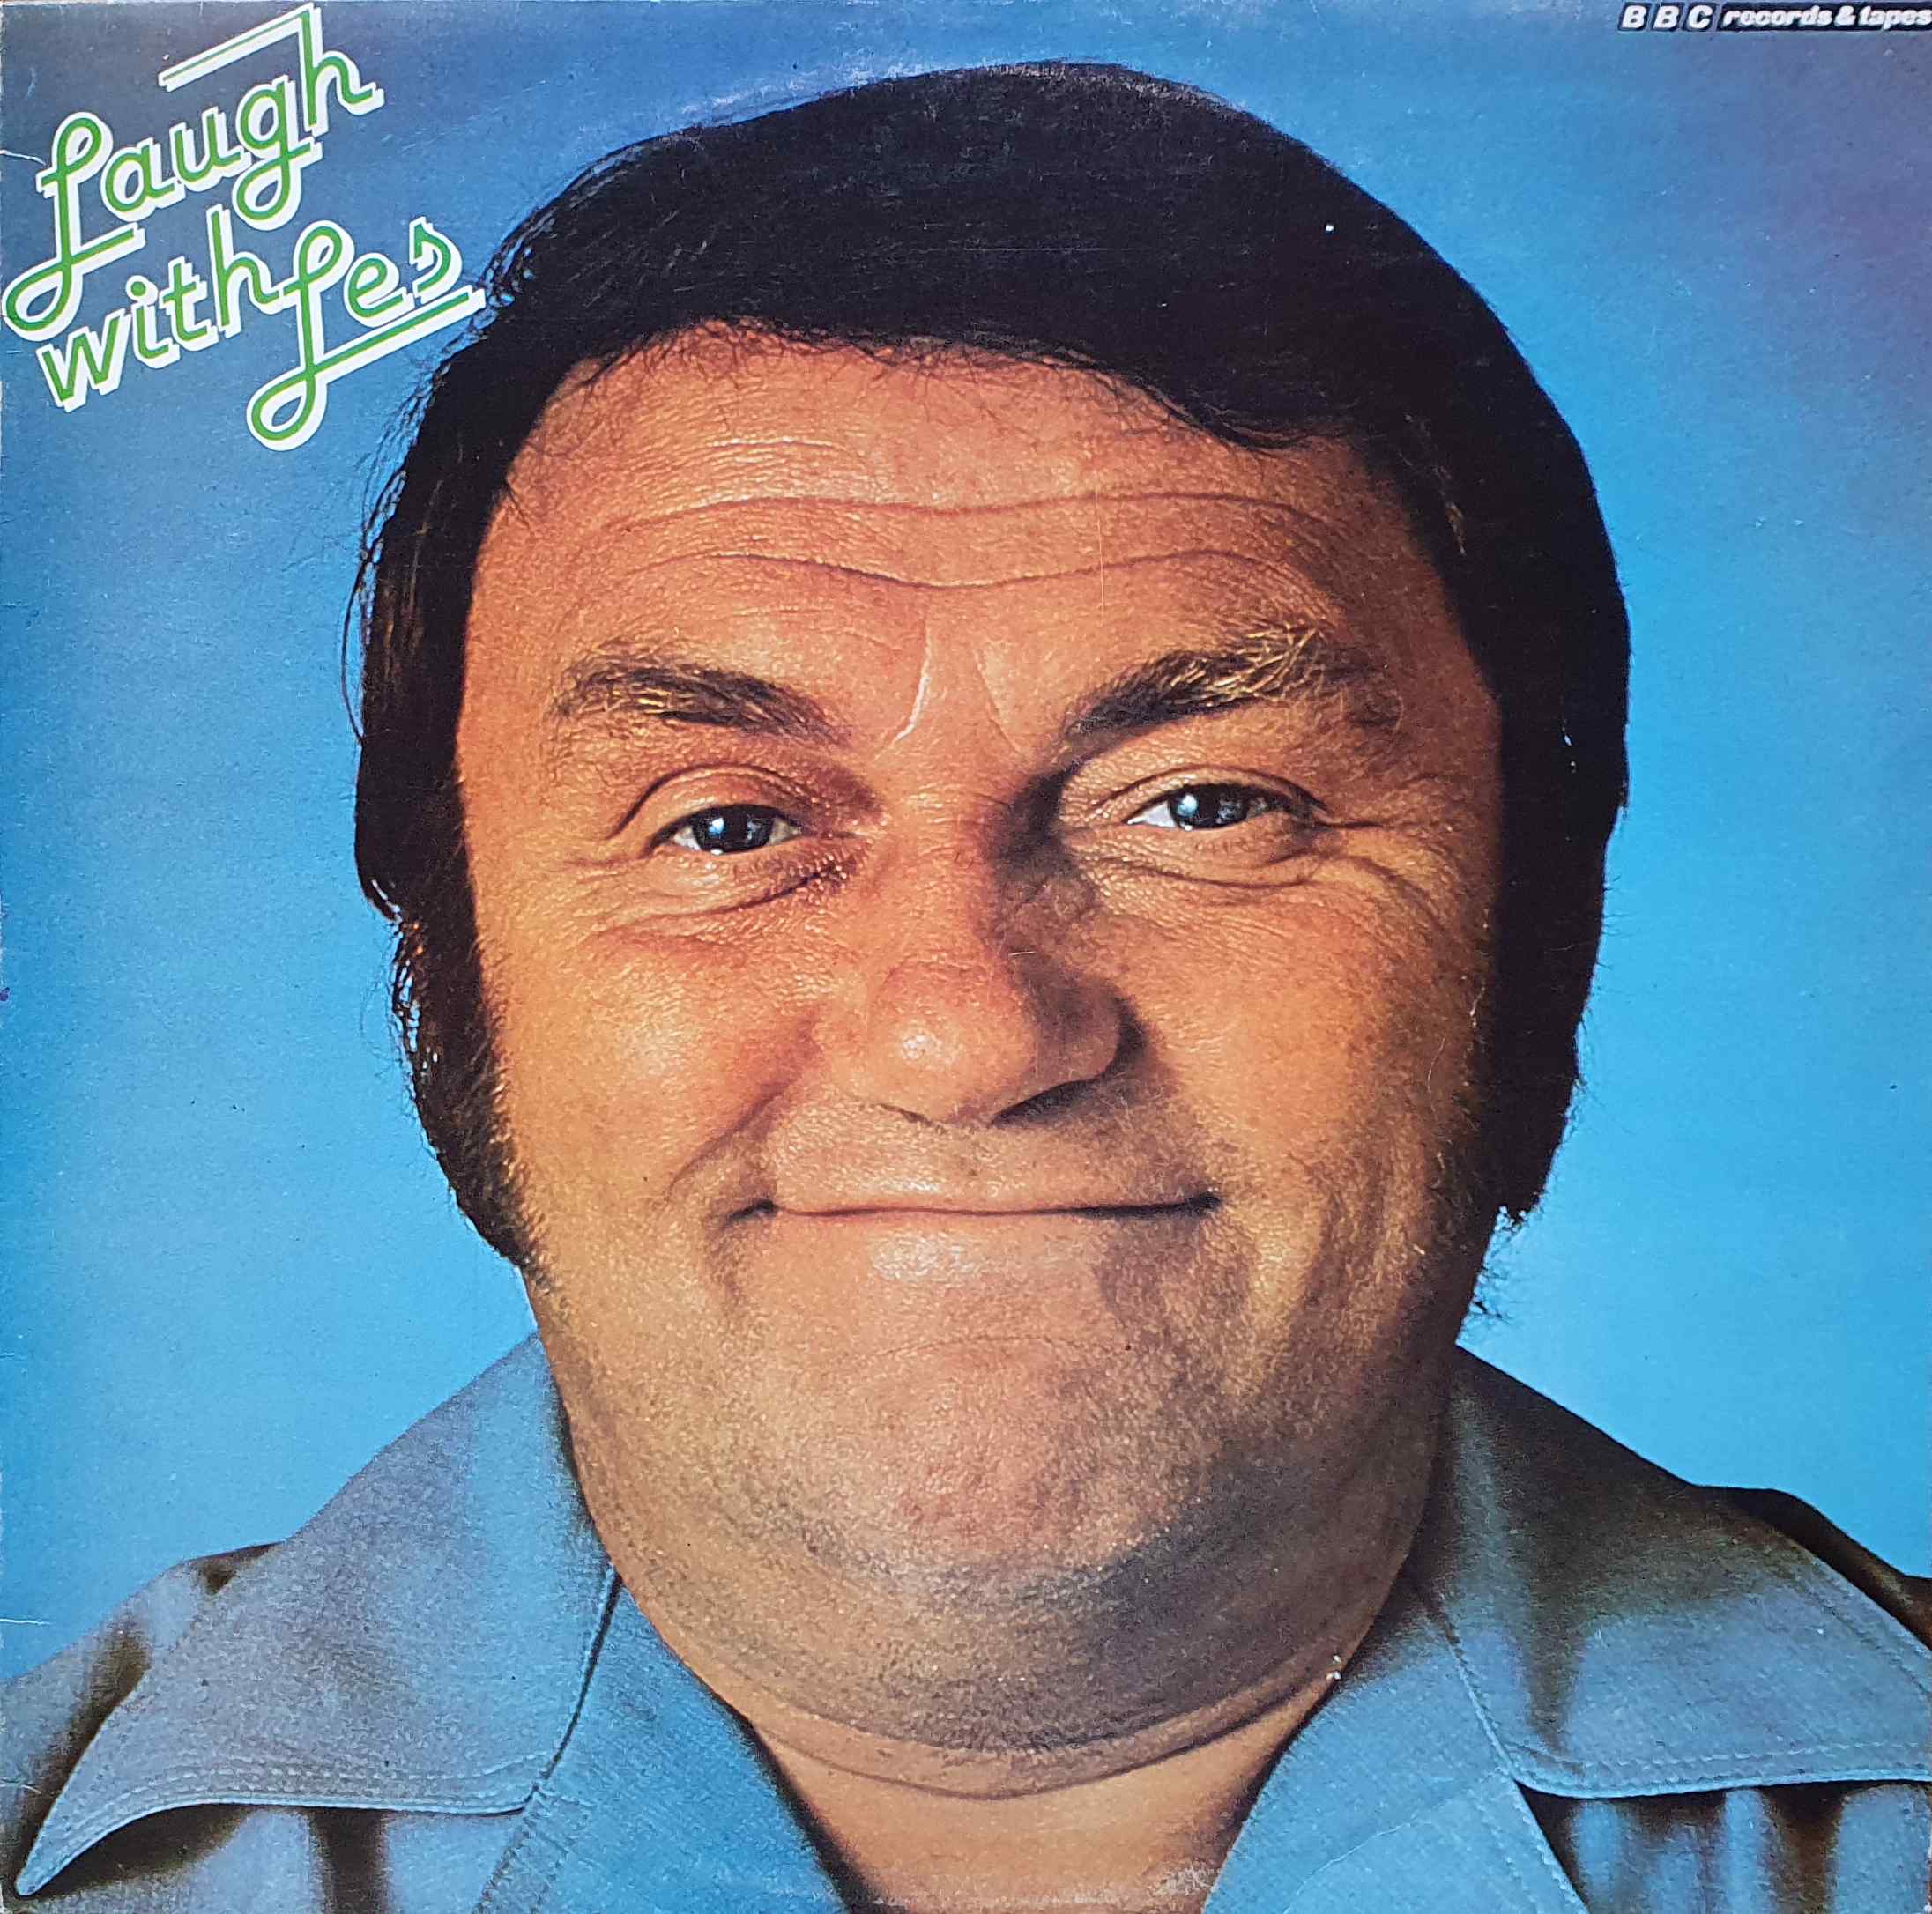 Picture of REB 346-iNZ Laugh with Les Dawson (New Zealand import) by artist Les Dawson from the BBC albums - Records and Tapes library